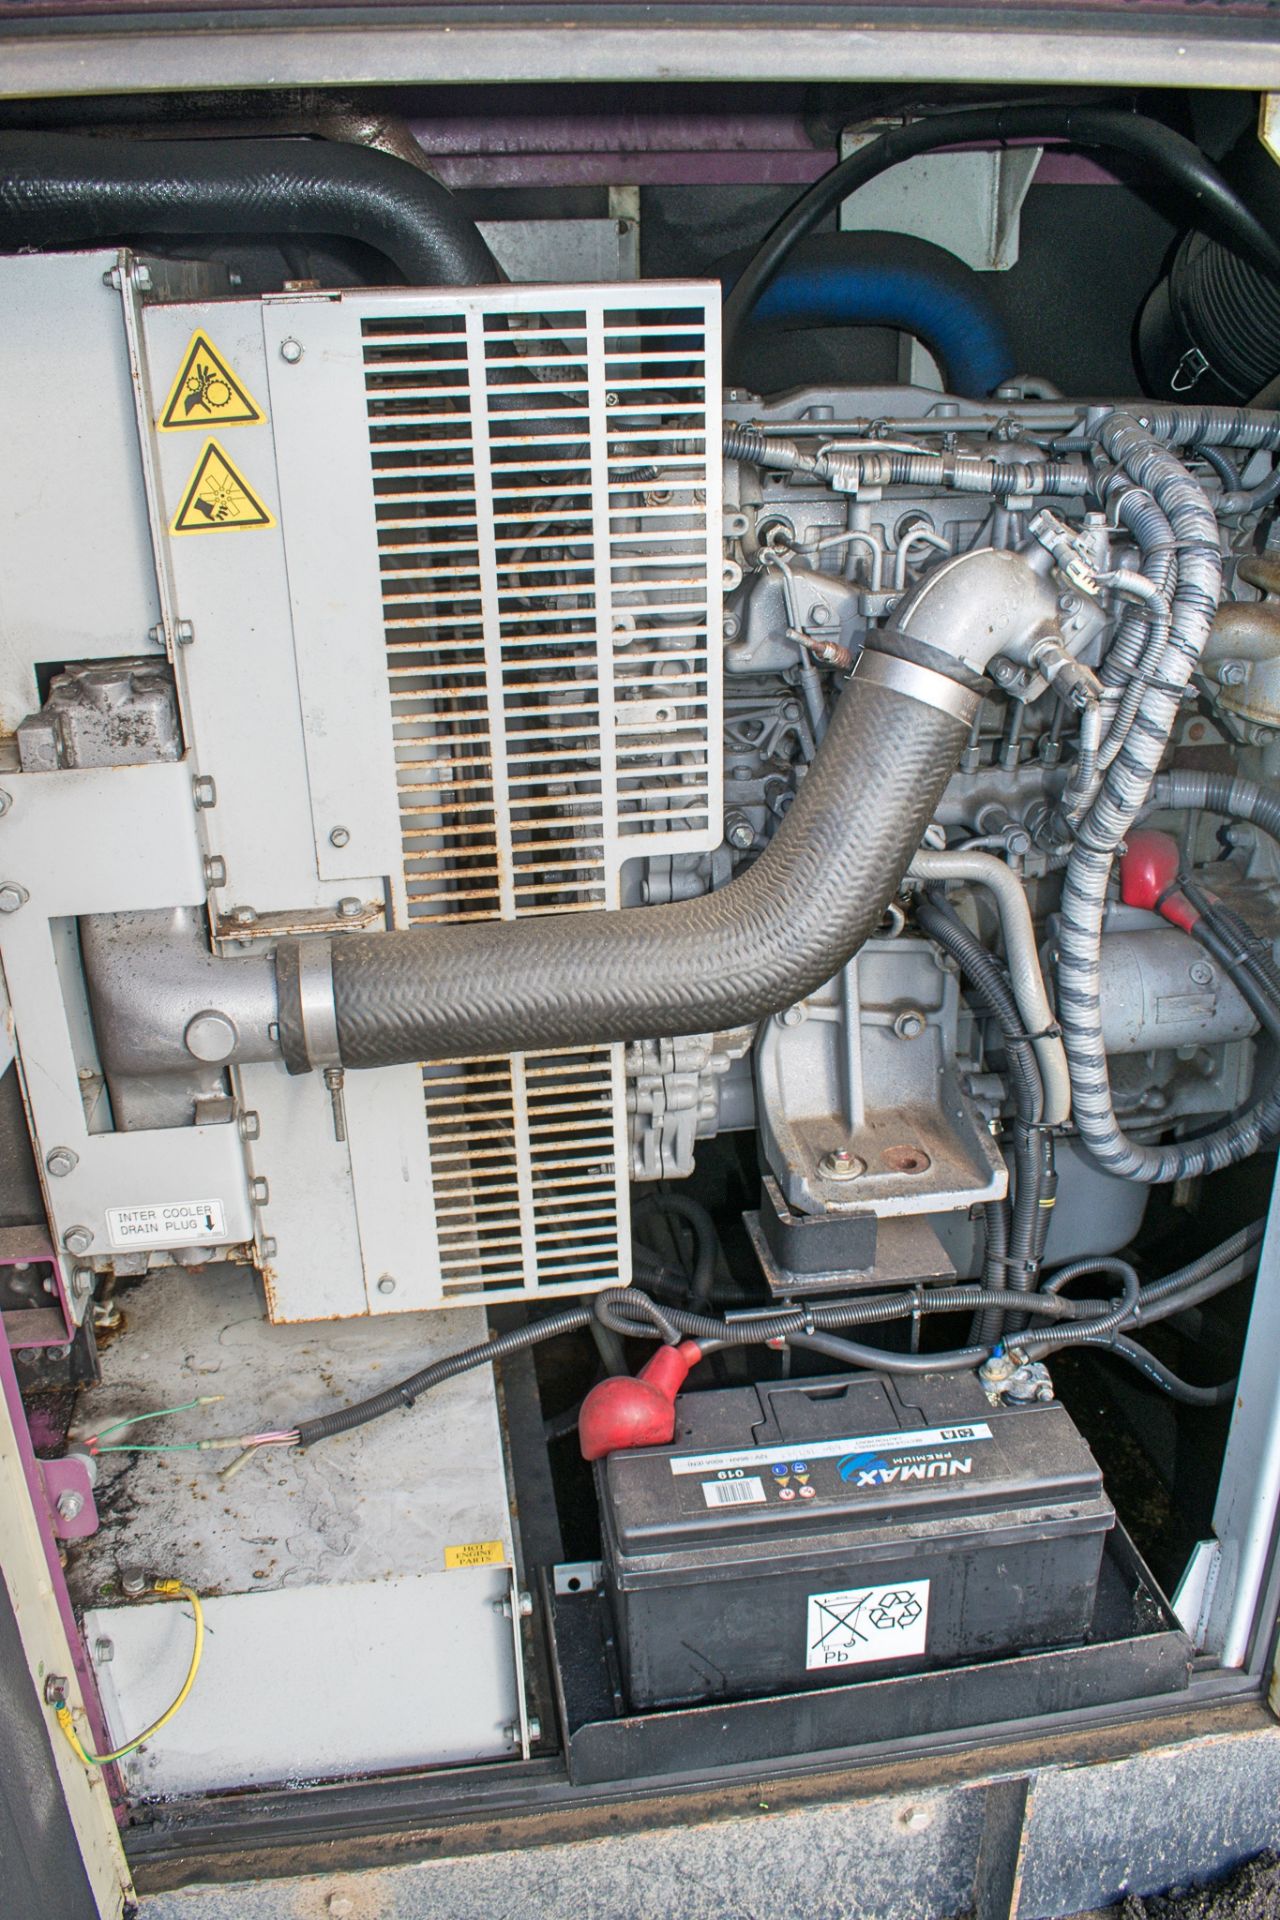 Denyo DCA-70 50 kva diesel driven generator Year: 2011 S/N: 3849695 Recorded Hours: 13,816 A566509 - Image 7 of 8